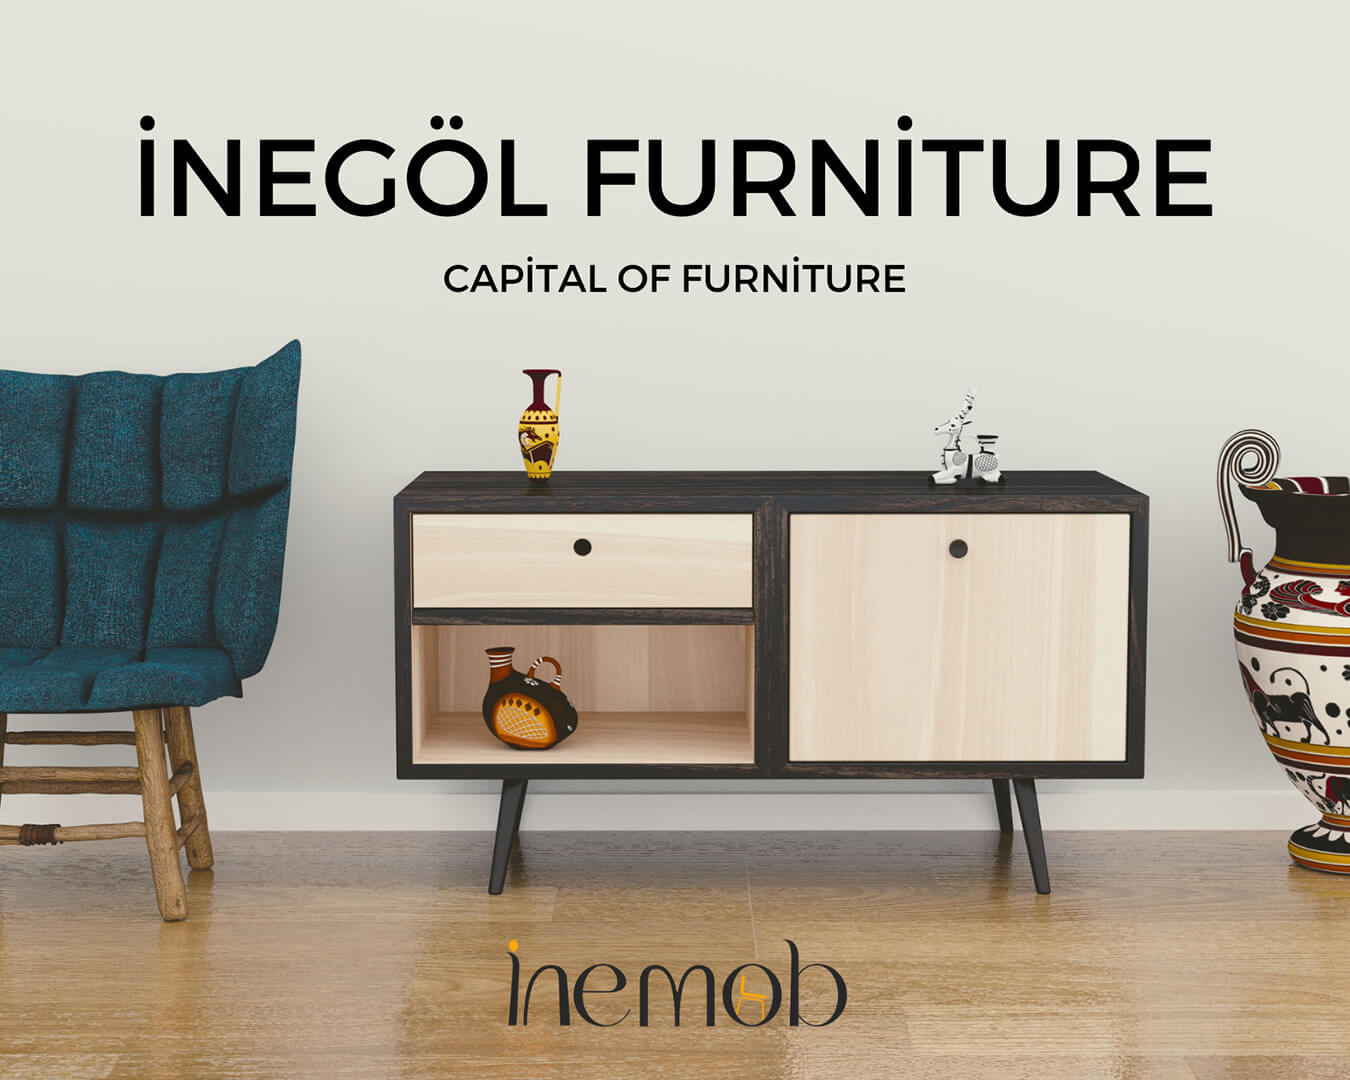 İnegöl Furniture Manufacturers: The Shining Stars of Turkey’s Furniture Sector